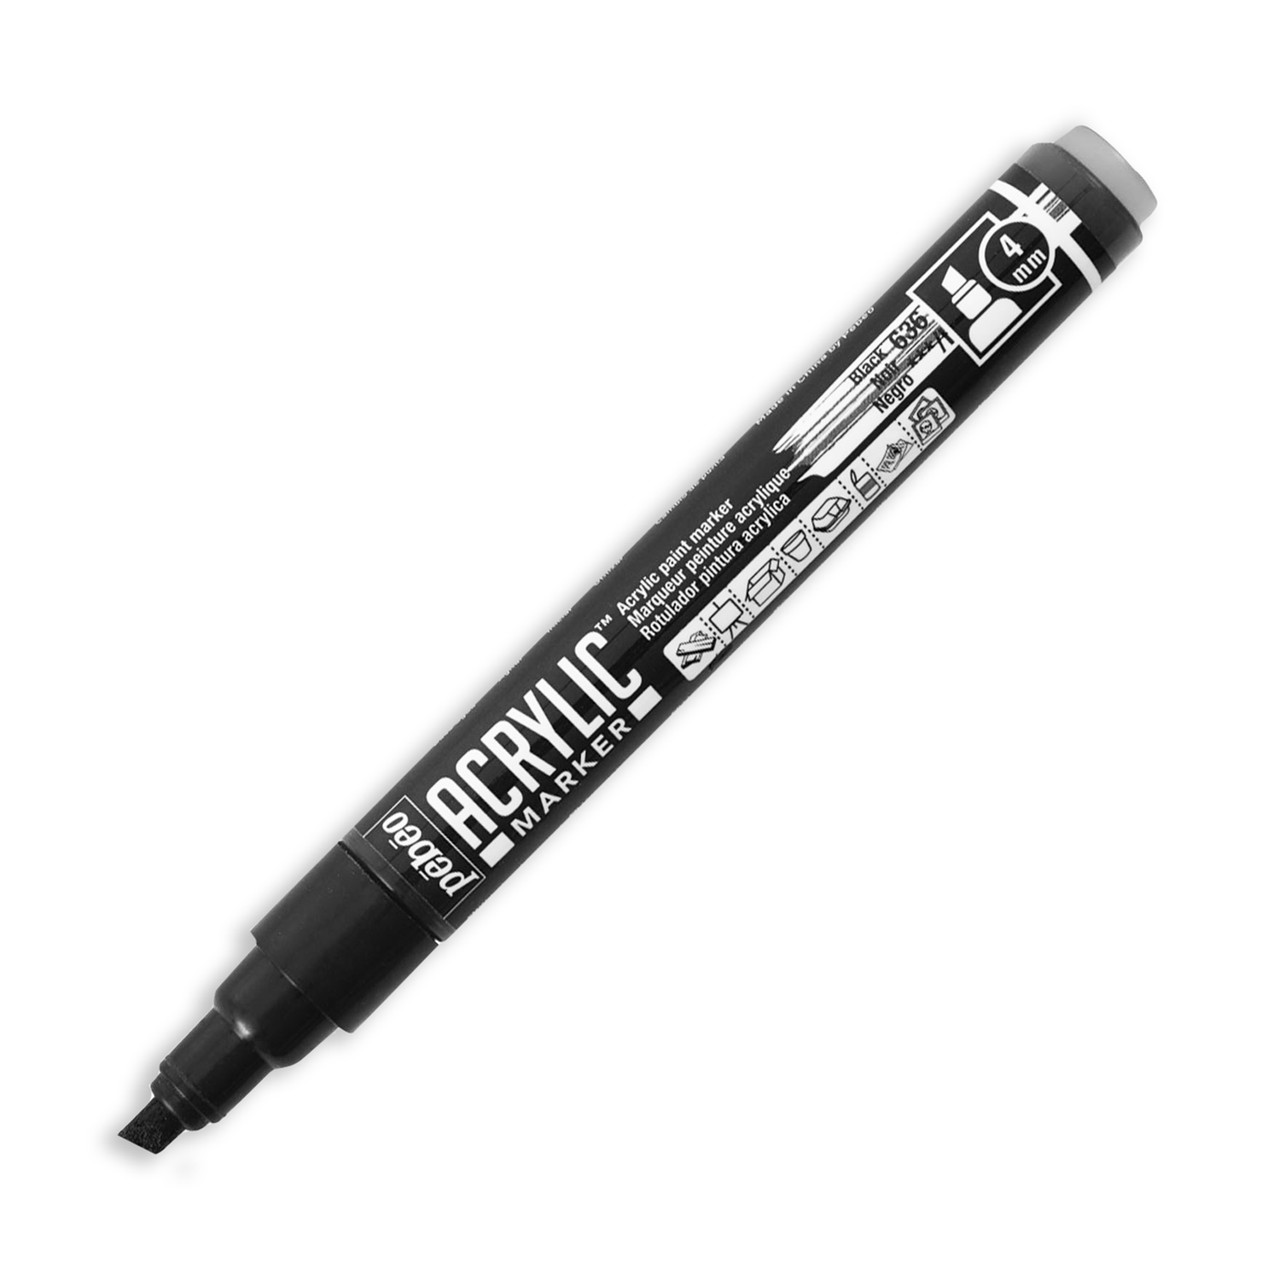 ROTULADORES FABER CASTELL BLACK EDITION C/10